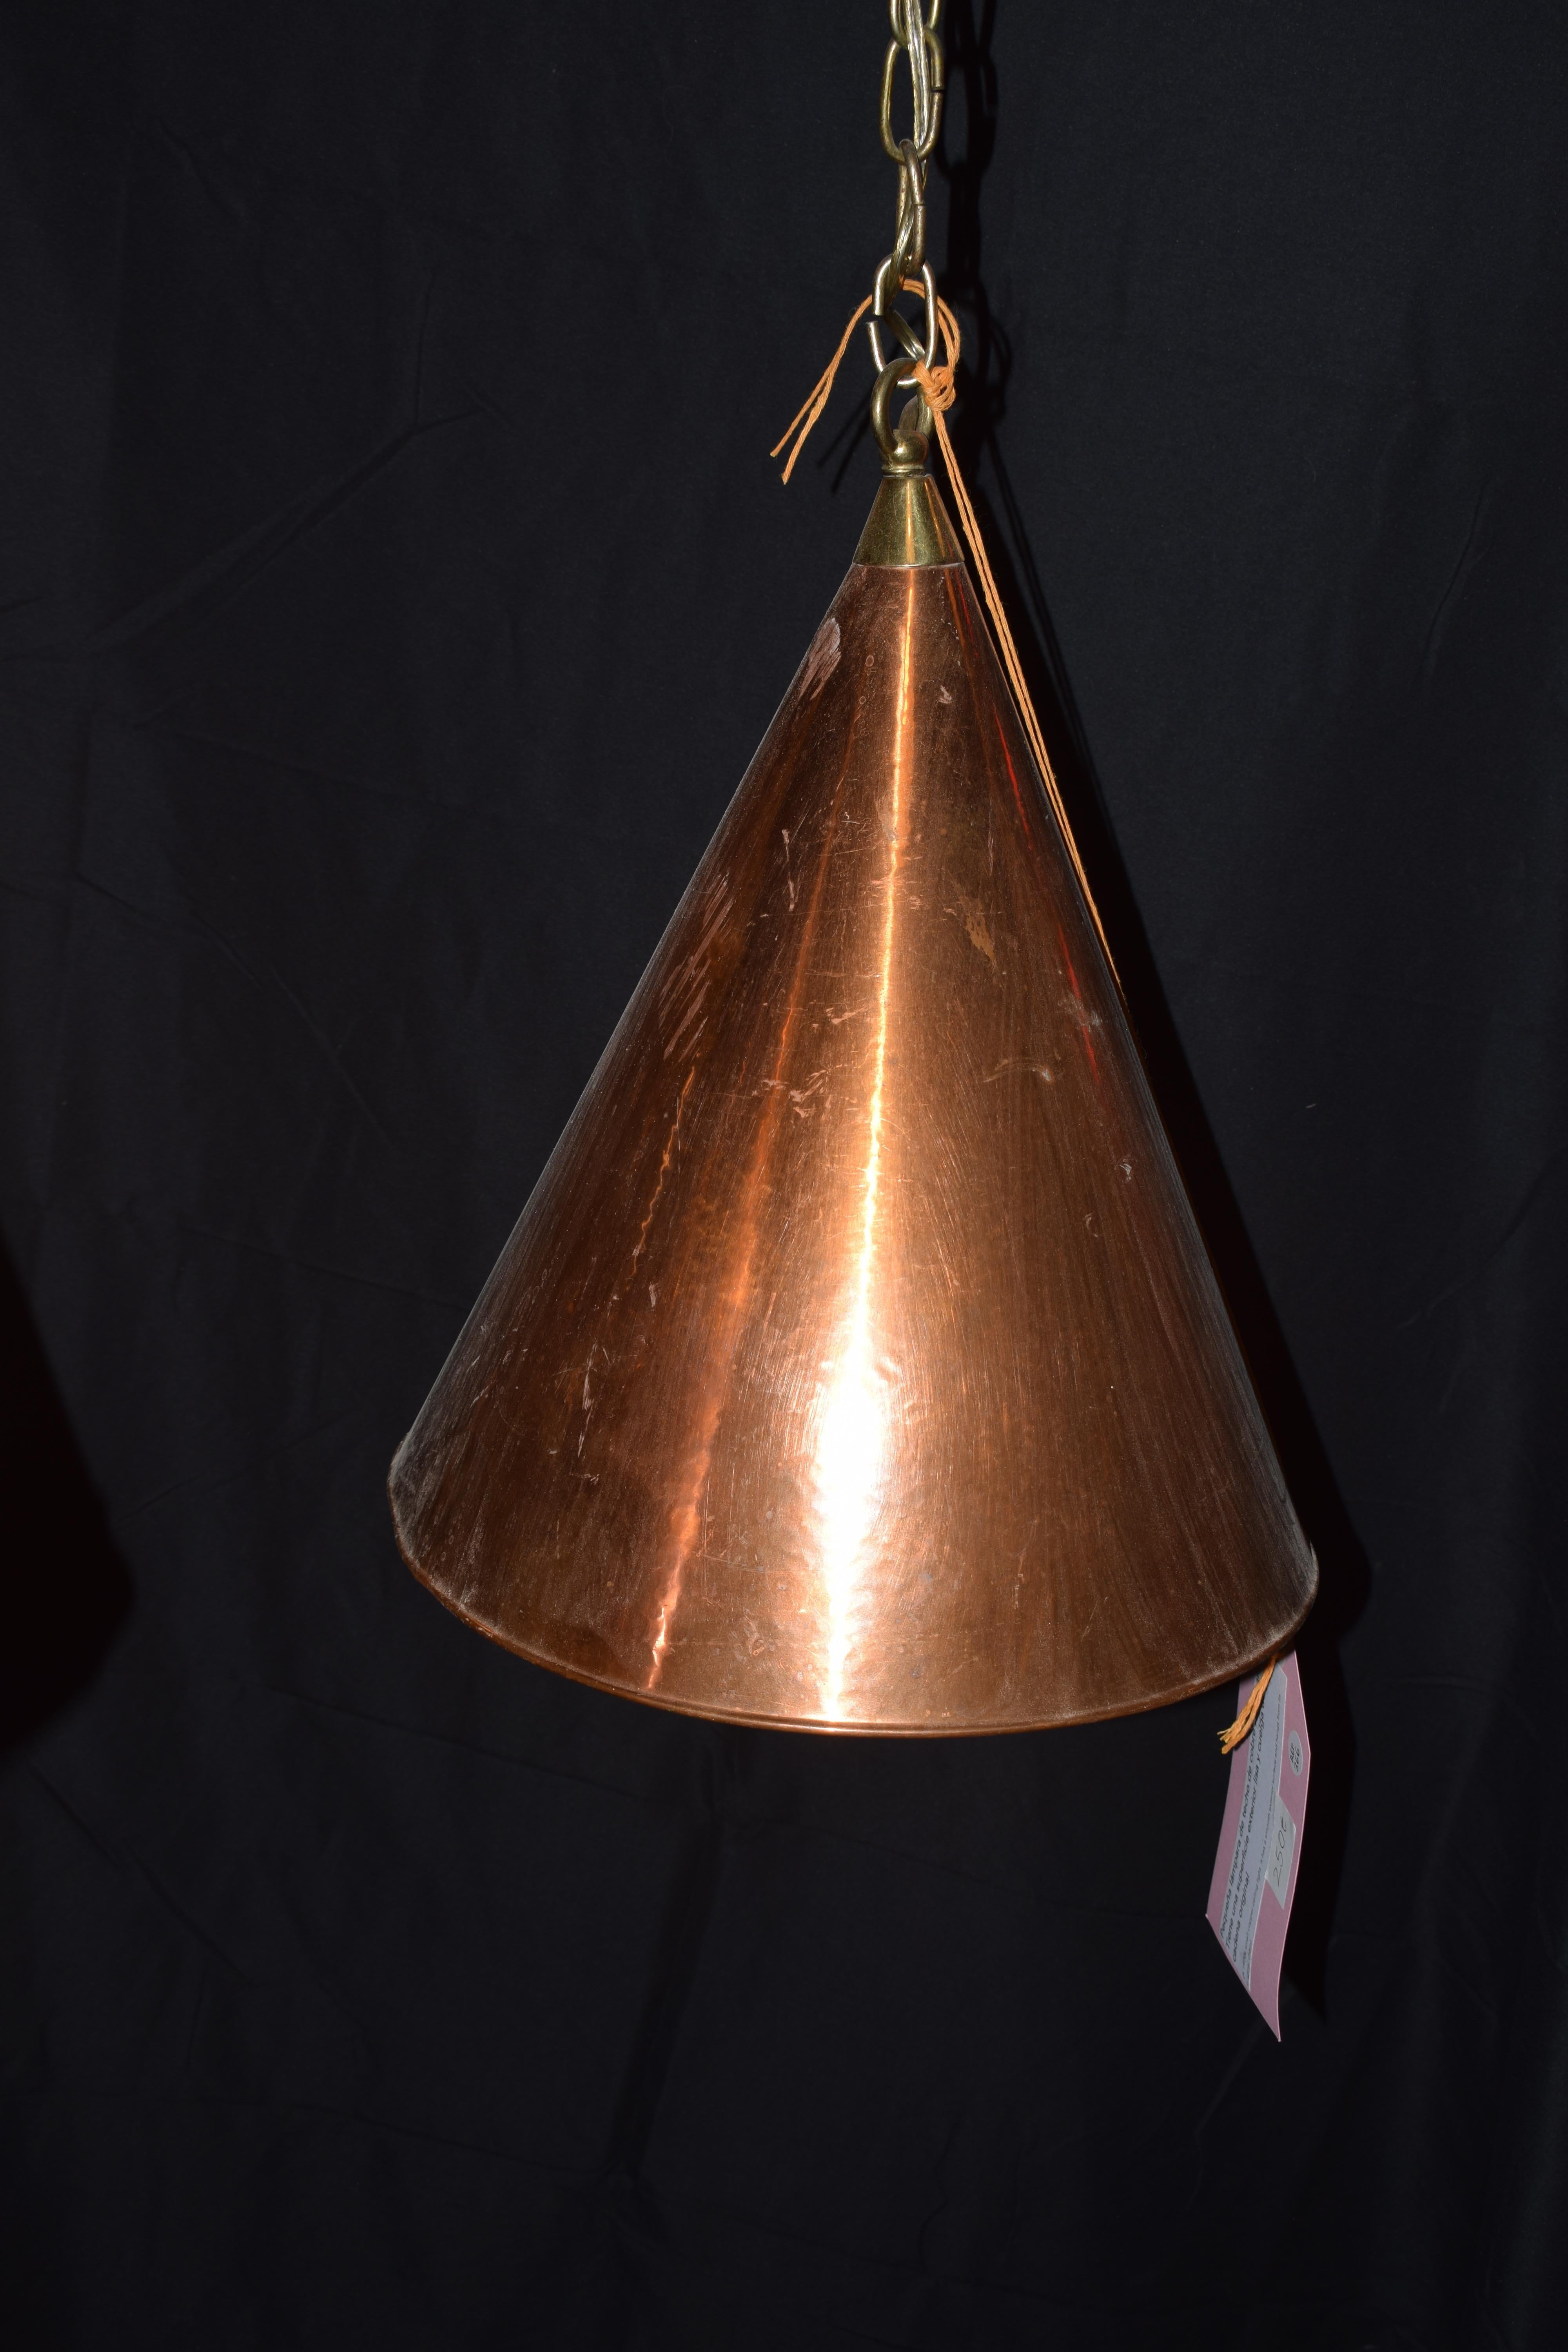 A Scandinavian Brutalist Danish copper pendant lamp. It is handcrafted and has its original hanging chain. It is elegantly hand hammered copper cone pendant lamp hanging on long chains.The shape is conical and its style is in a minimal style. It has